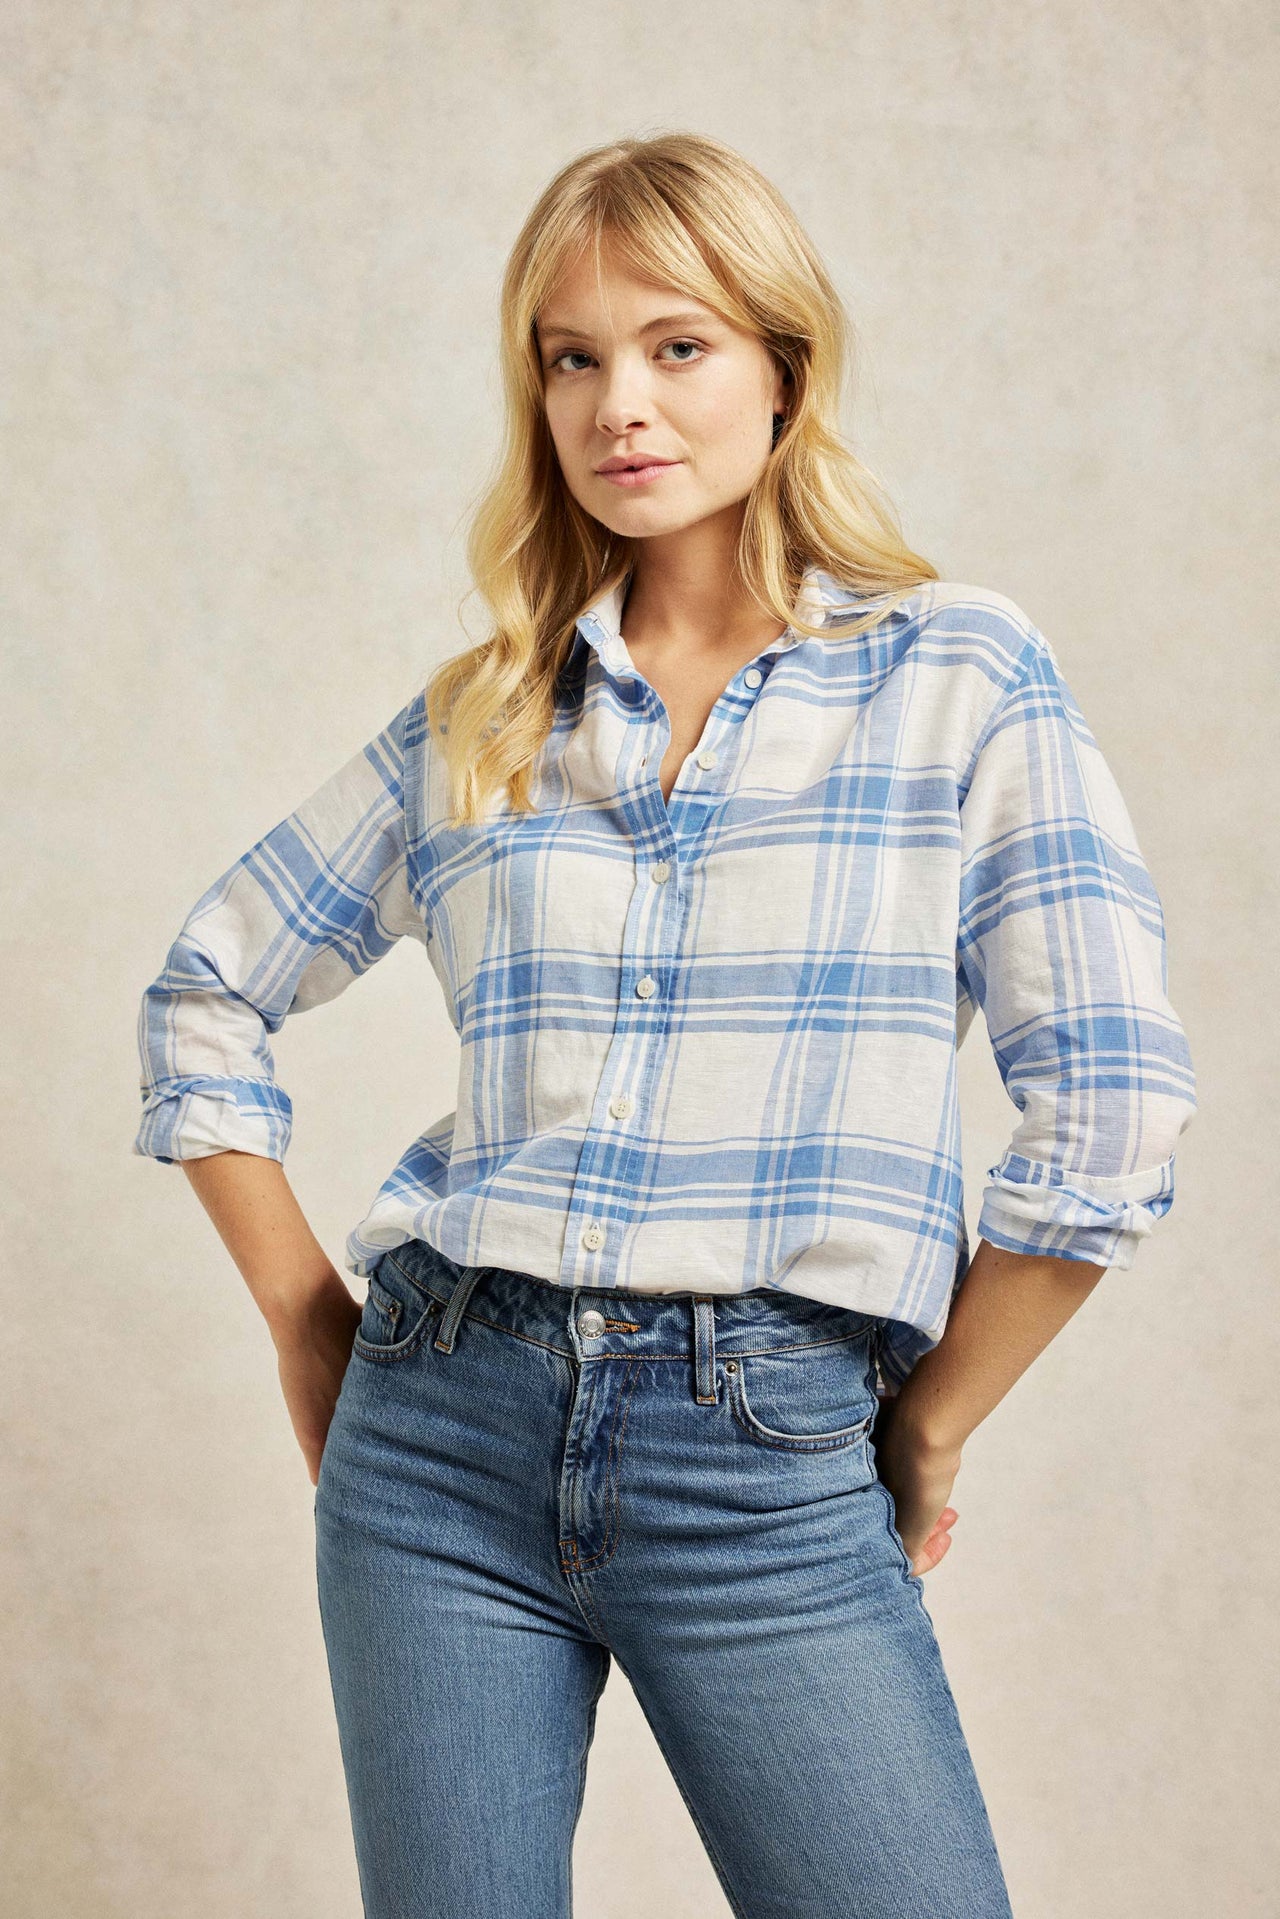 Linen blend women’s shirt with back box pleat and curved hem for extra ease. Cornflower-blue and white checks. Woven from a breathable blend of linen and cotton to a shrug-on-and-go silhouette. Classic collar. Casual wear. Size XS, S, M, L, XL. Machine wash.